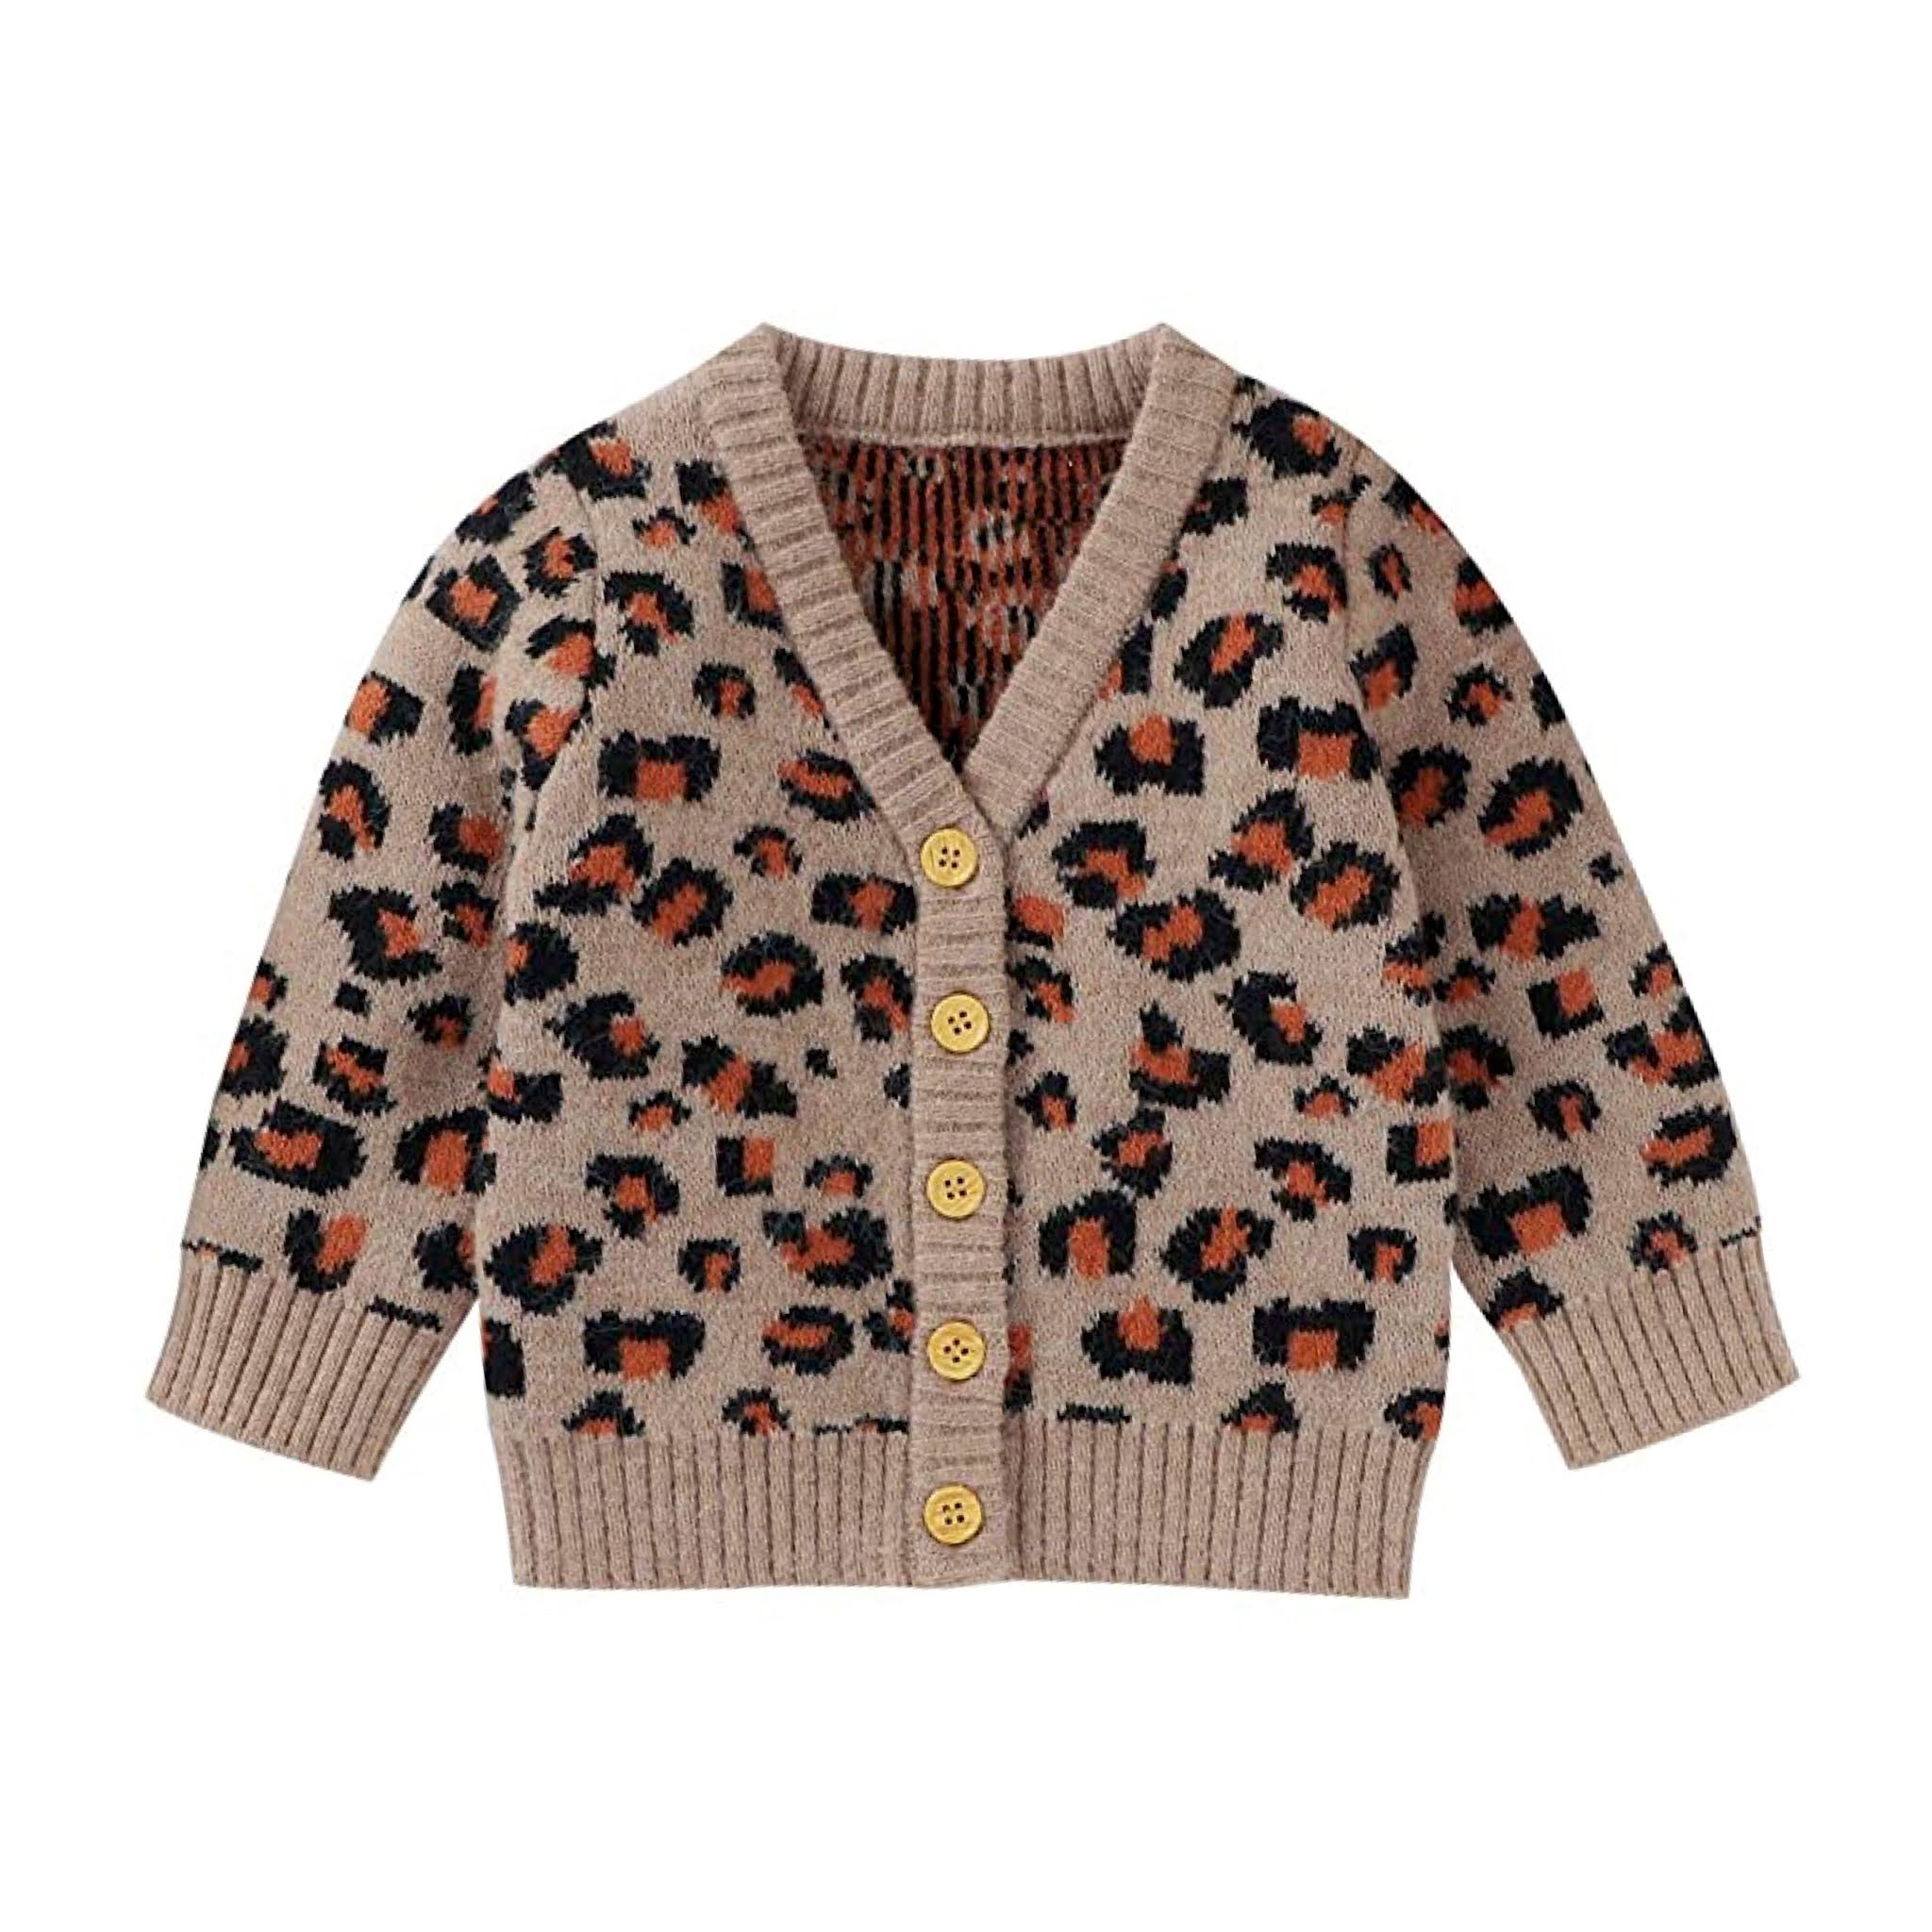 Baby Leopard Print Cardigan from Amazon